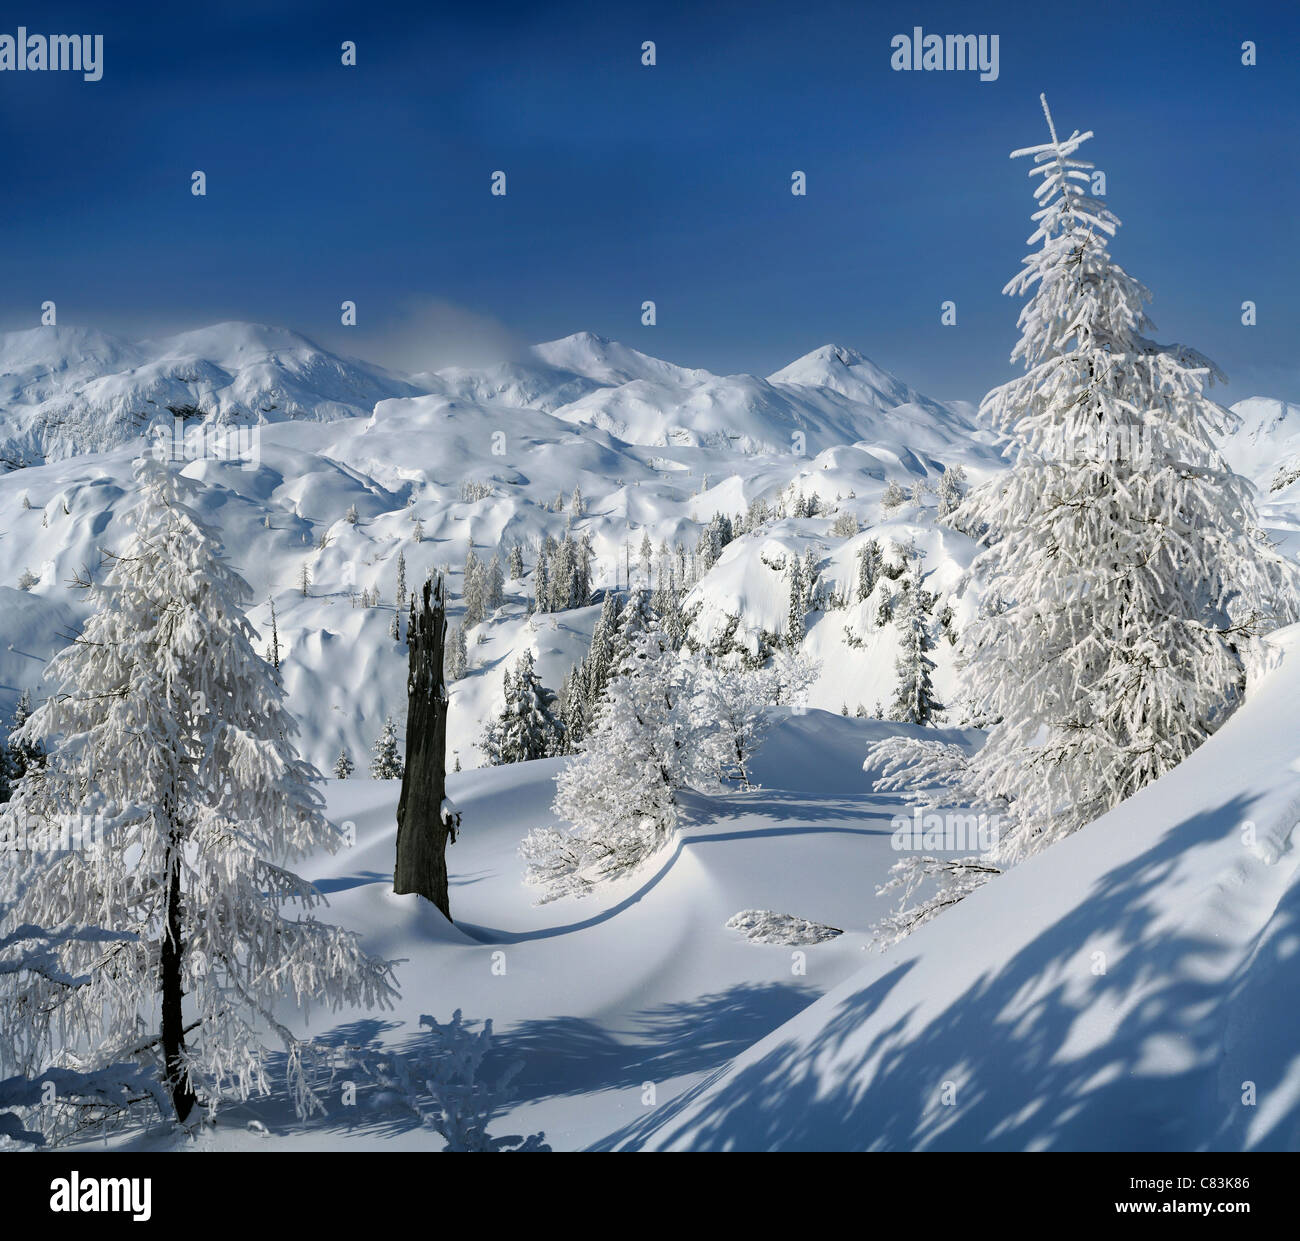 Snow covered mountains and trees in Tiglav National park, Slovenia Stock Photo